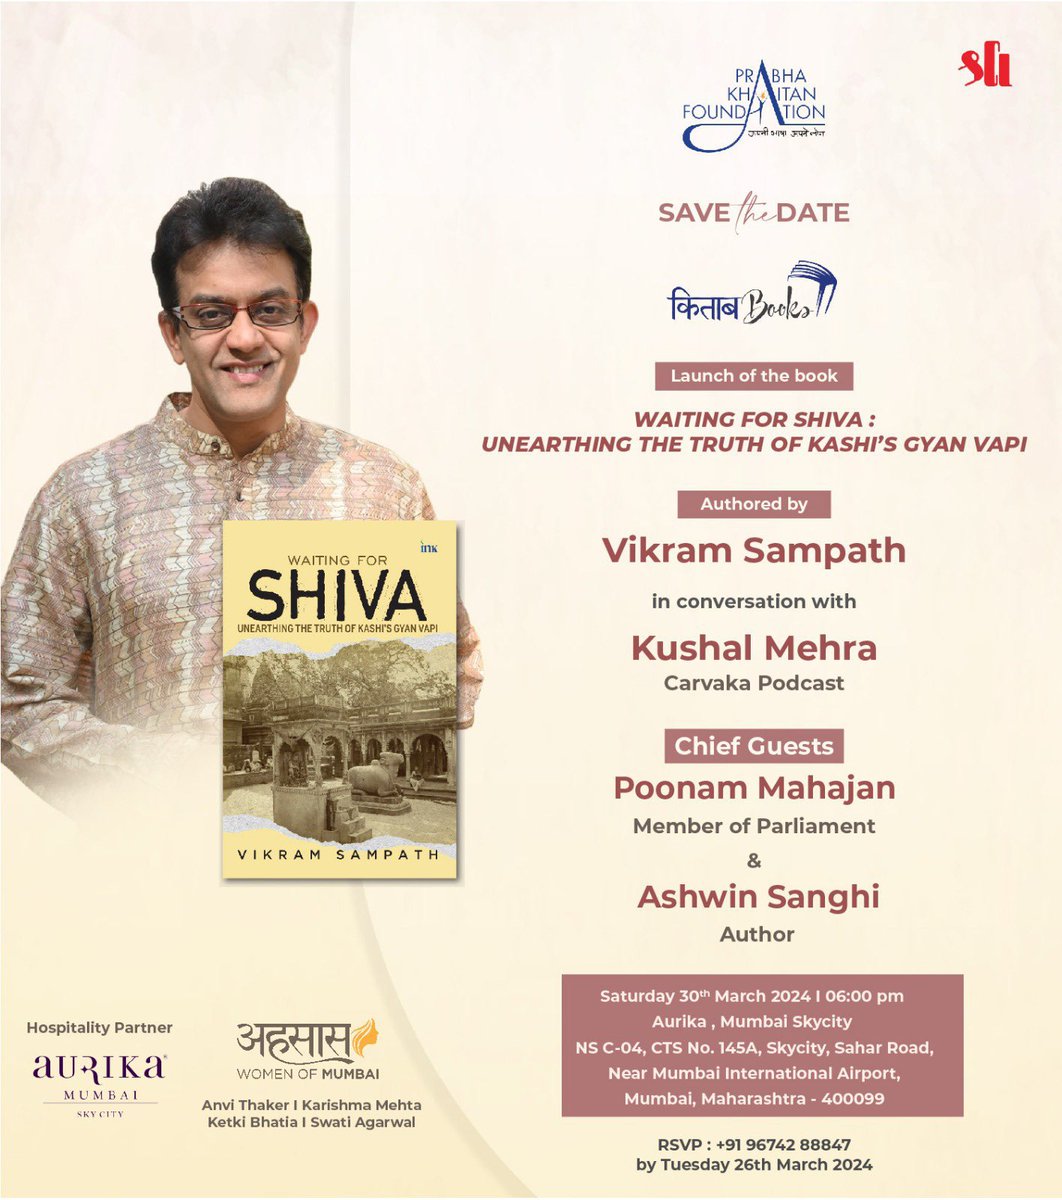 Looking forward to the Mumbai launch of #WaitingForShiva by my dear friend @vikramsampath on March 30th, 6pm, at Aurika, Mumbai Skycity. Delighted to be in conversation with Vikram, @kushal_mehra, and @poonam_mahajan ji as part of the intro to this amazing work on Kashi’s Gyan…